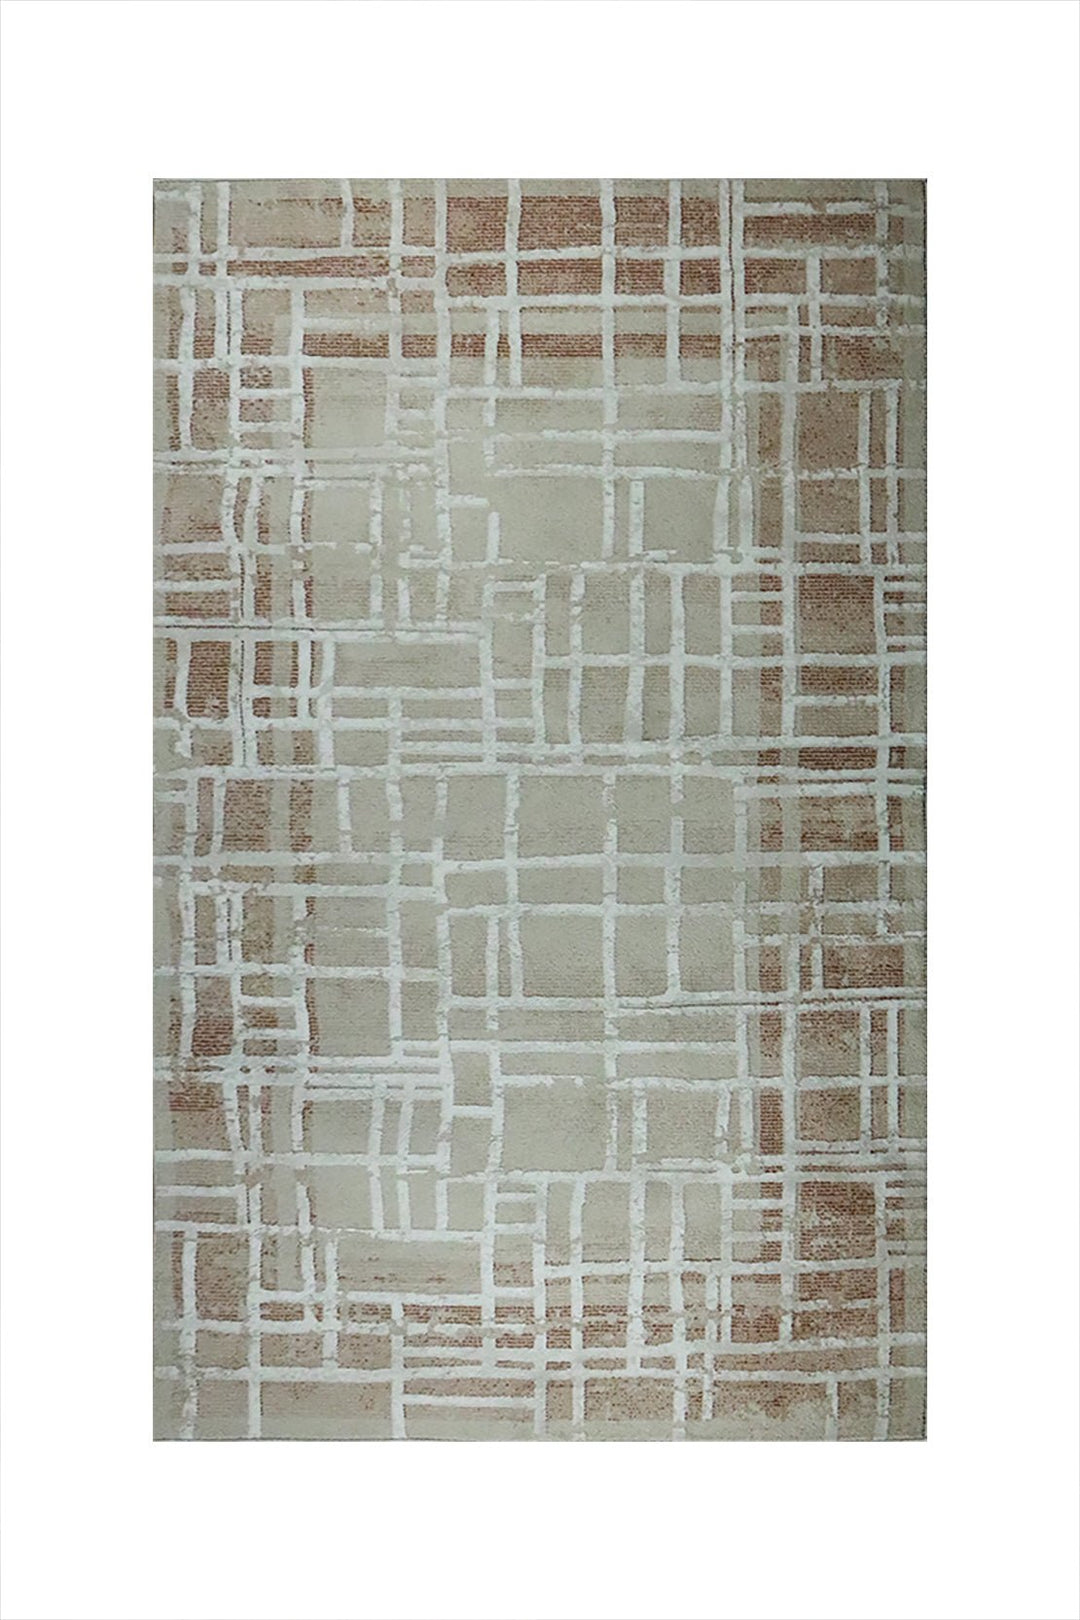 Turkish Modern Festival WD Rug - 5.2 x 7.5 FT - Cream and Maroon - Sleek and Minimalist for Chic Interiors - V Surfaces